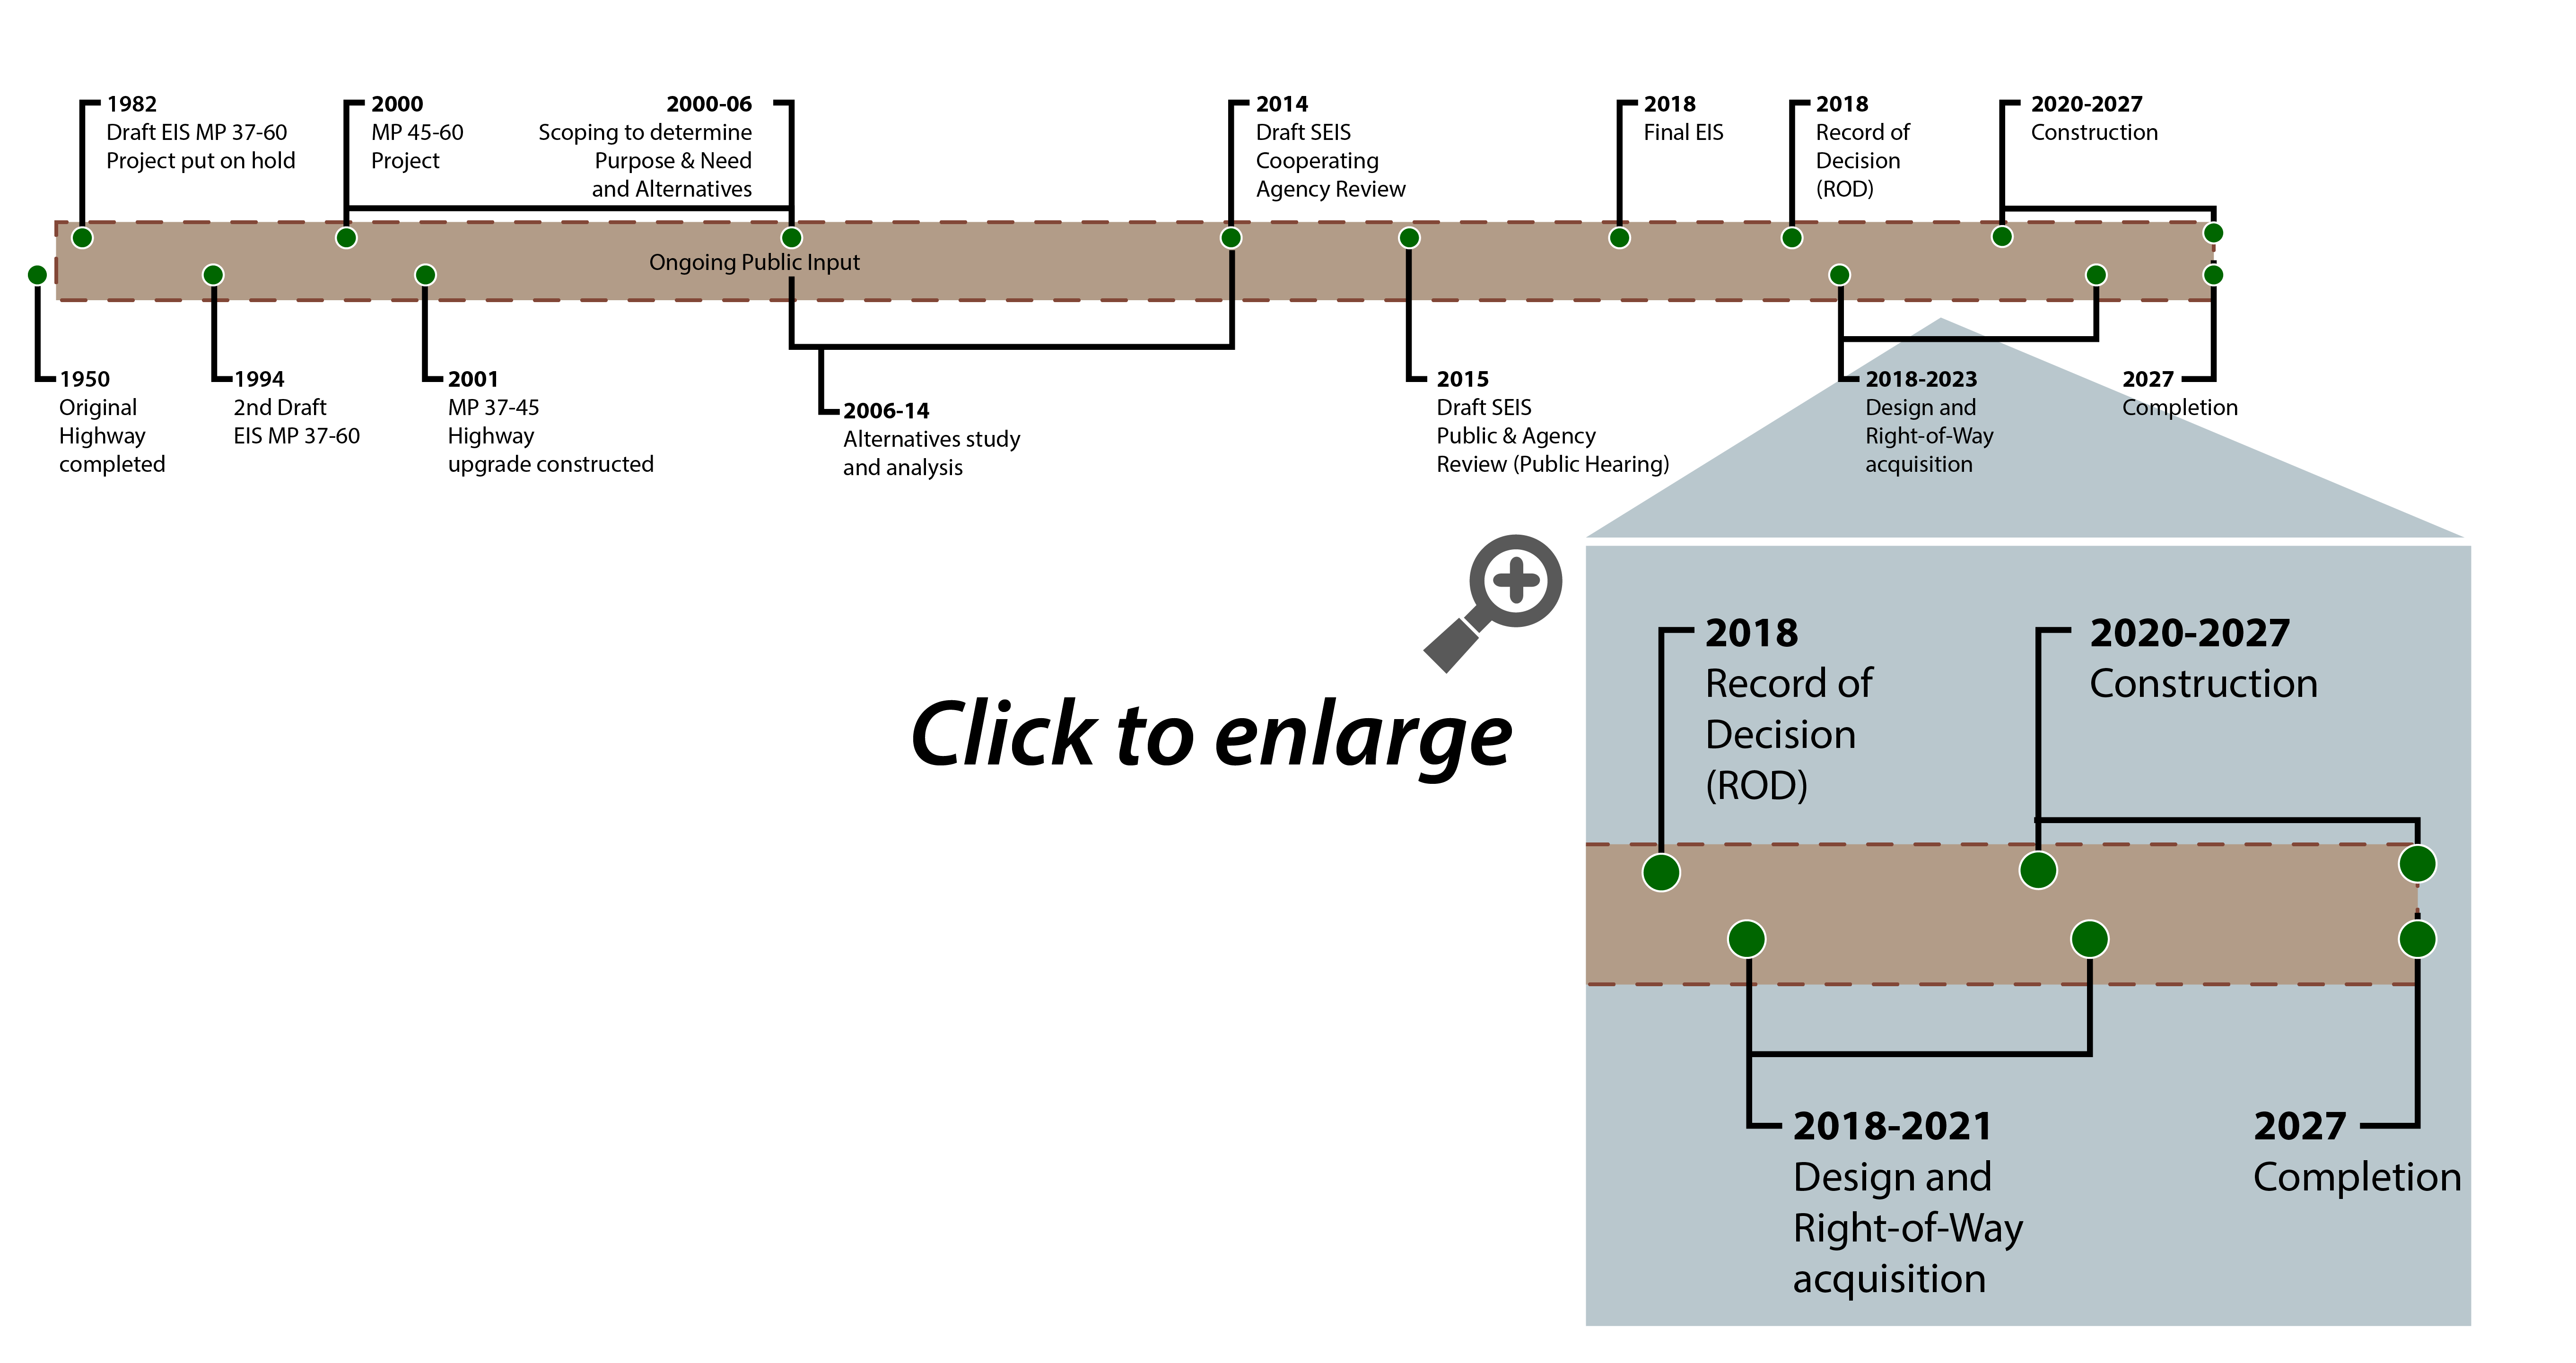 Sterling Highway 45-60 project history timeline. This will open in a new browser window.